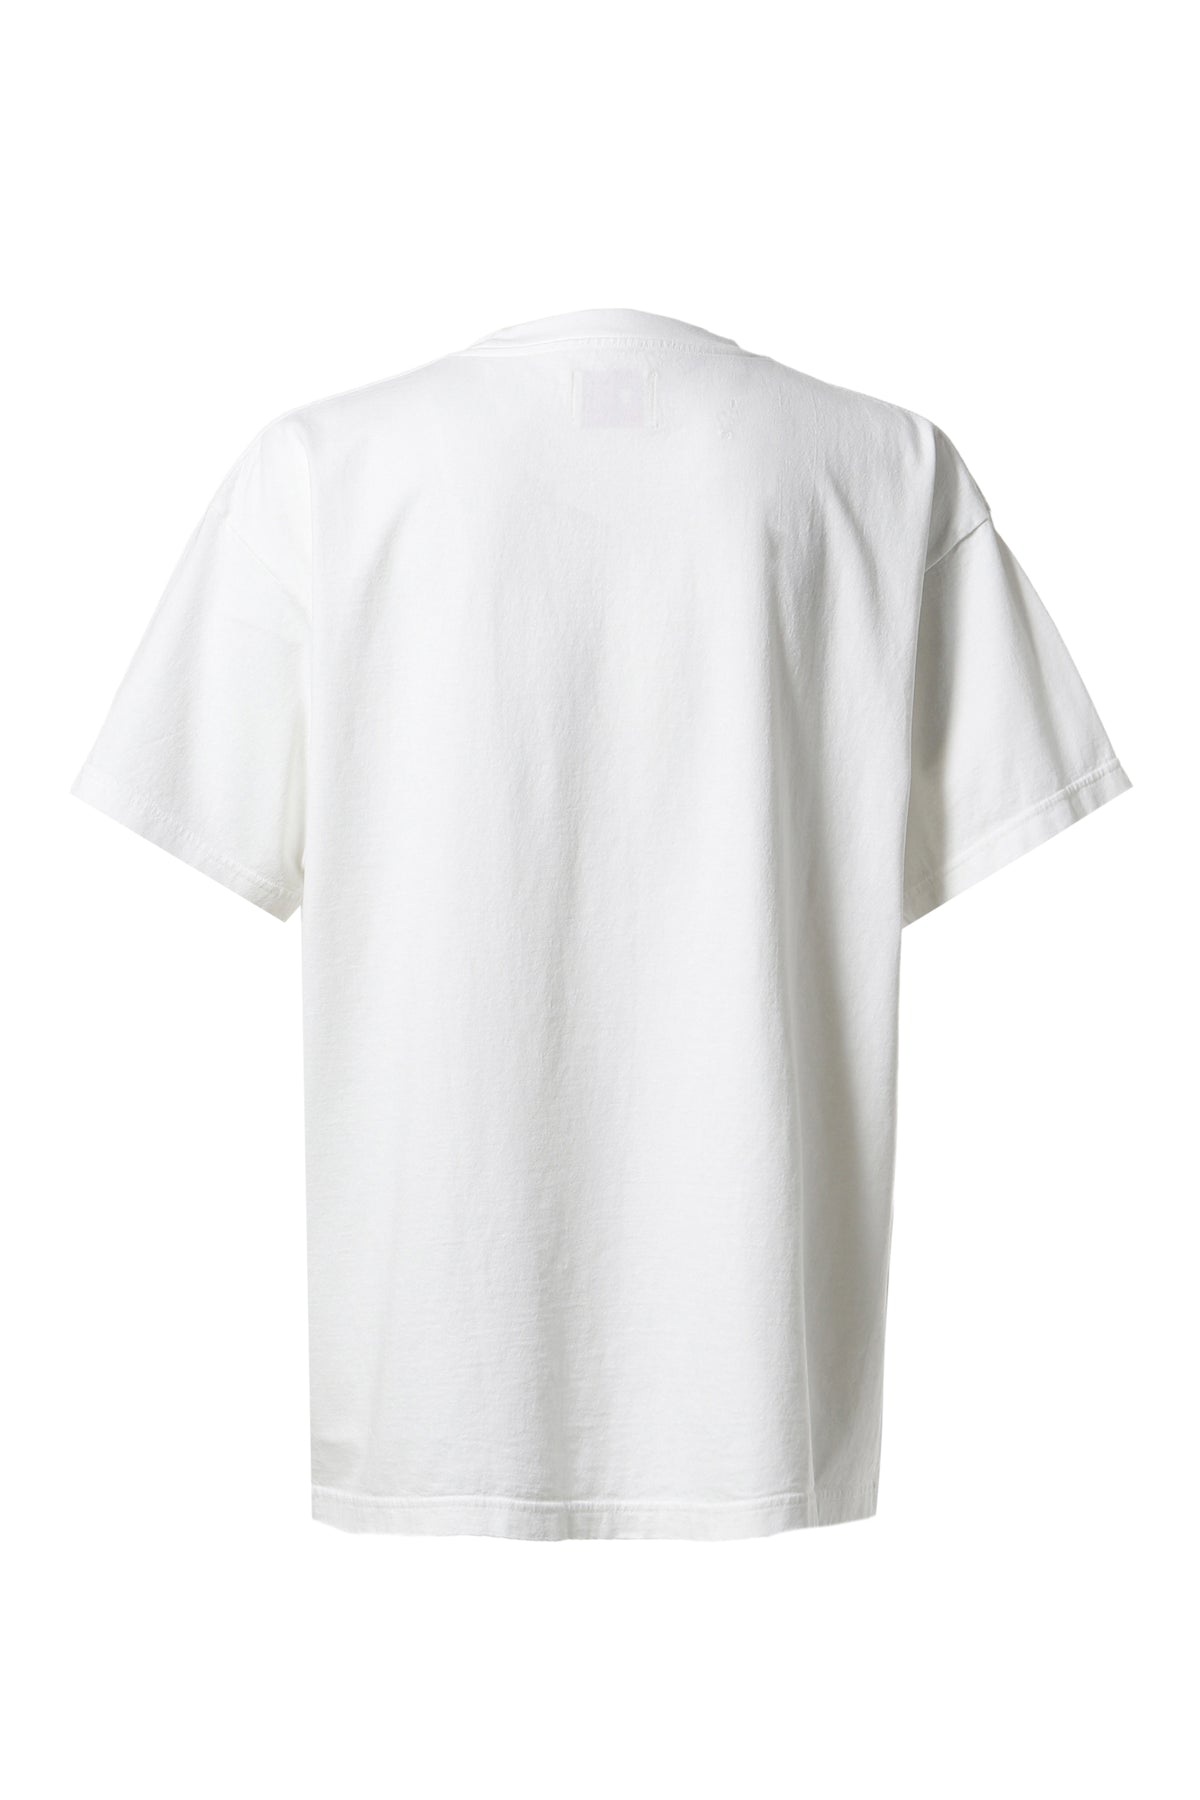 MADE TO SATISIFY TEE / WHT